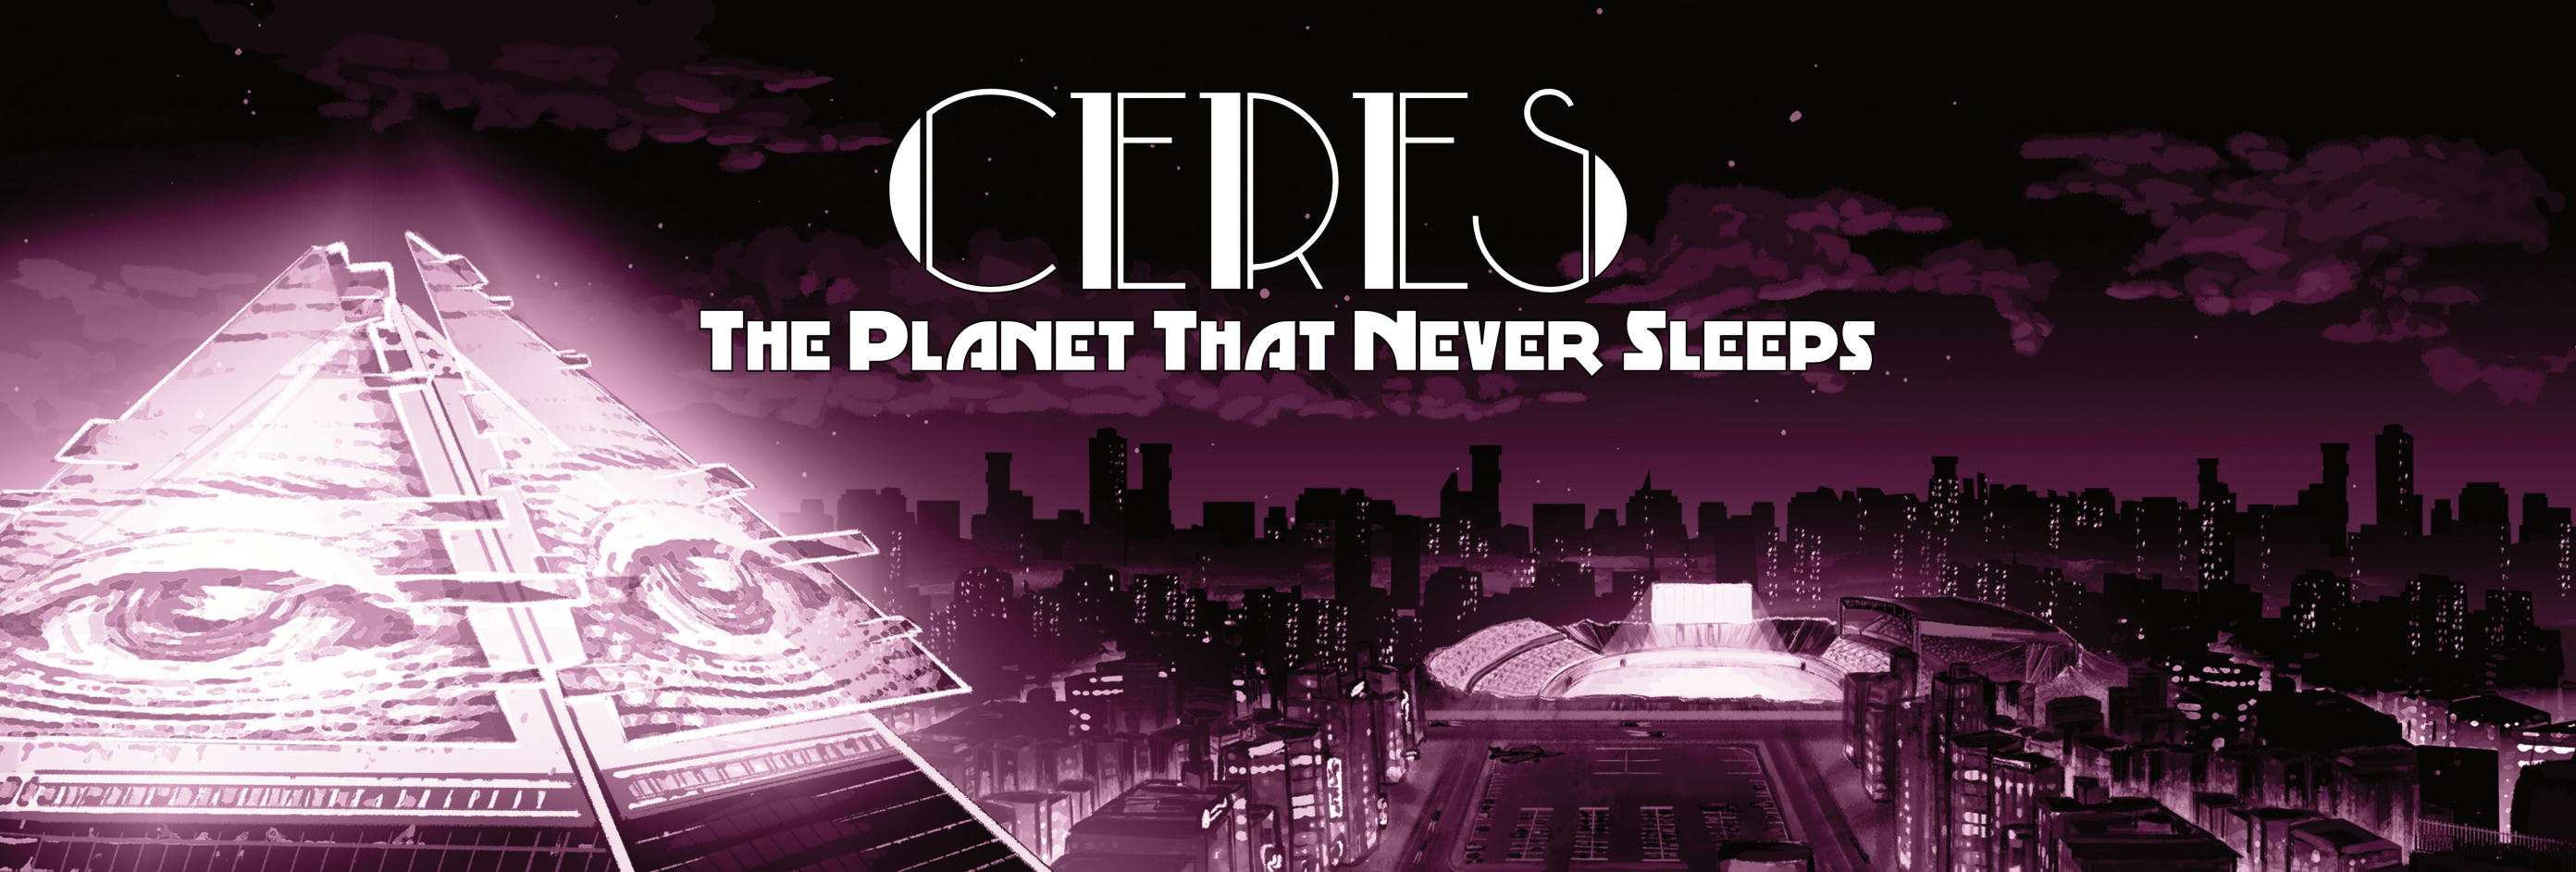 CERES: The Planet That Never Sleeps